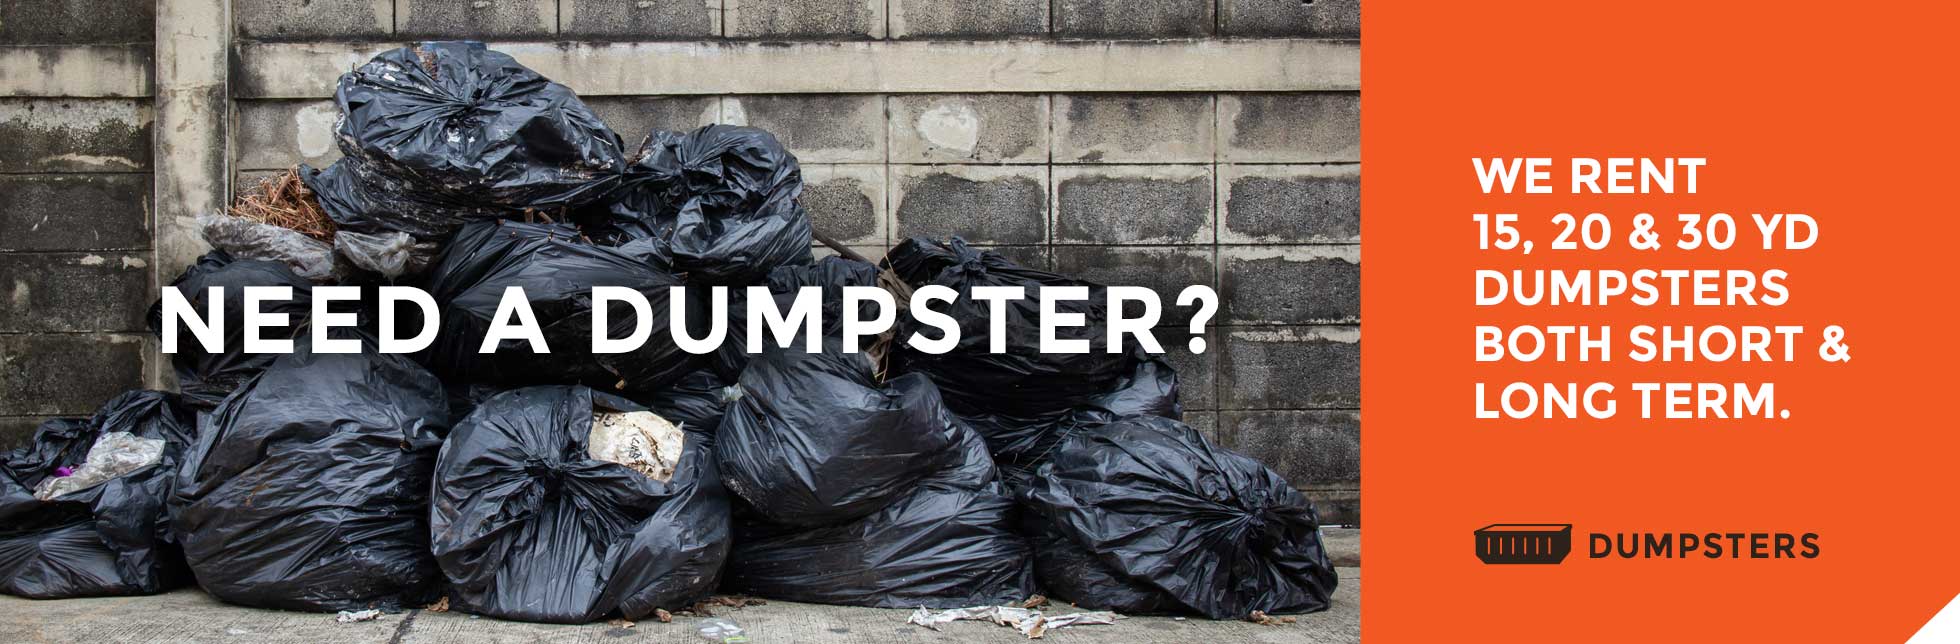 Need a dumpster?